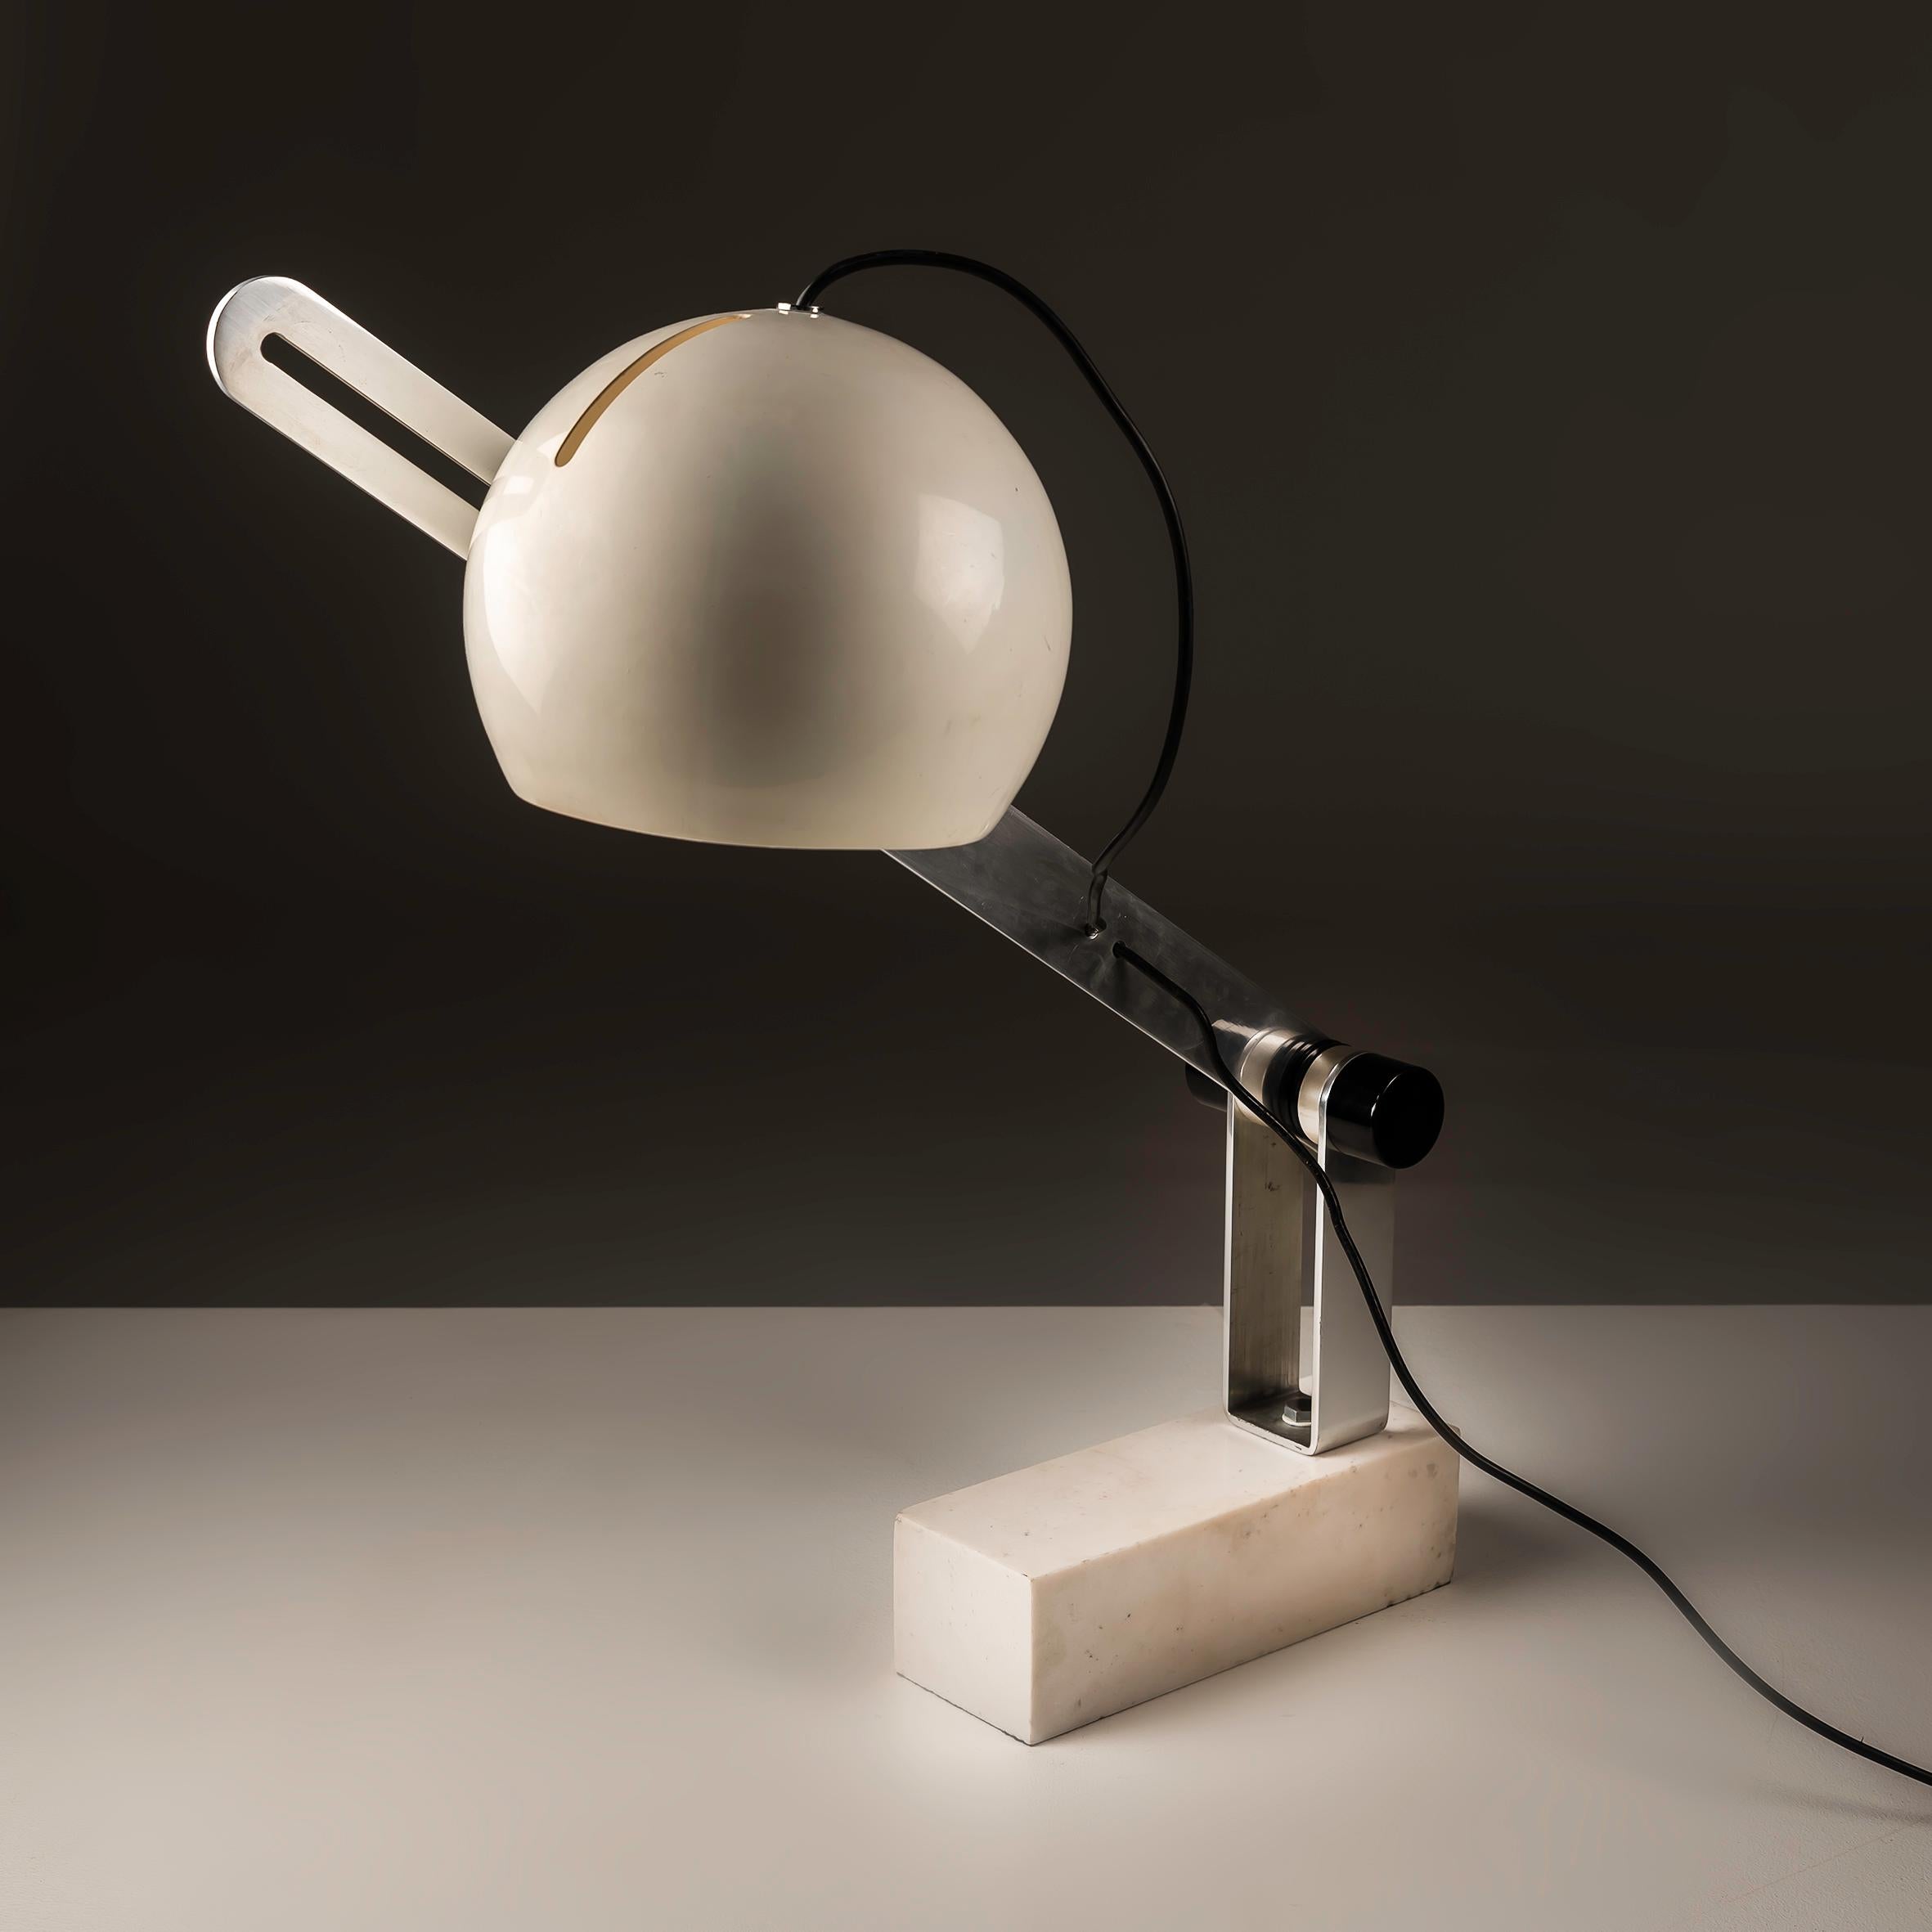 
This rare Italian lamp, reminiscent of the style of Joe Colombo and dating back to the 1960s, epitomizes the innovative spirit of Space Age design. Its Carrara marble base not only lends a touch of luxury but also anchors the lamp with stability